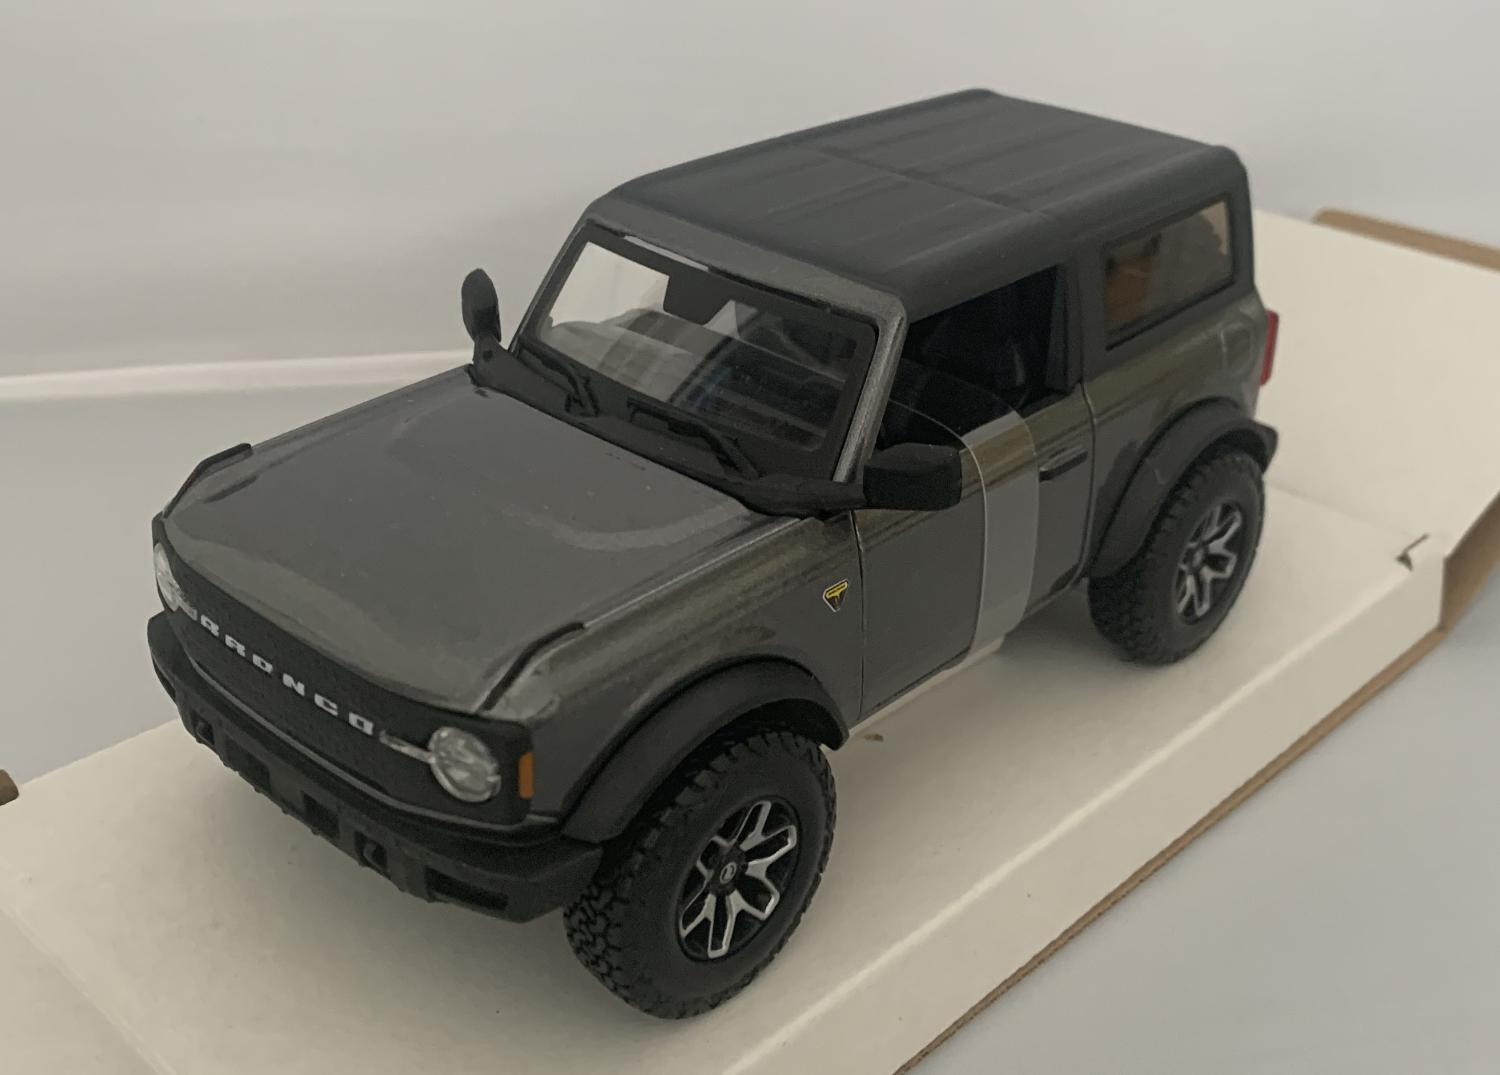 An excellent scale model of a Ford Bronco Badlands decorated in grey and black roof with silver and black wheels. Other trims are finished in black.  Features include opening driver and passenger doors, working wheels and spare wheel on rear door